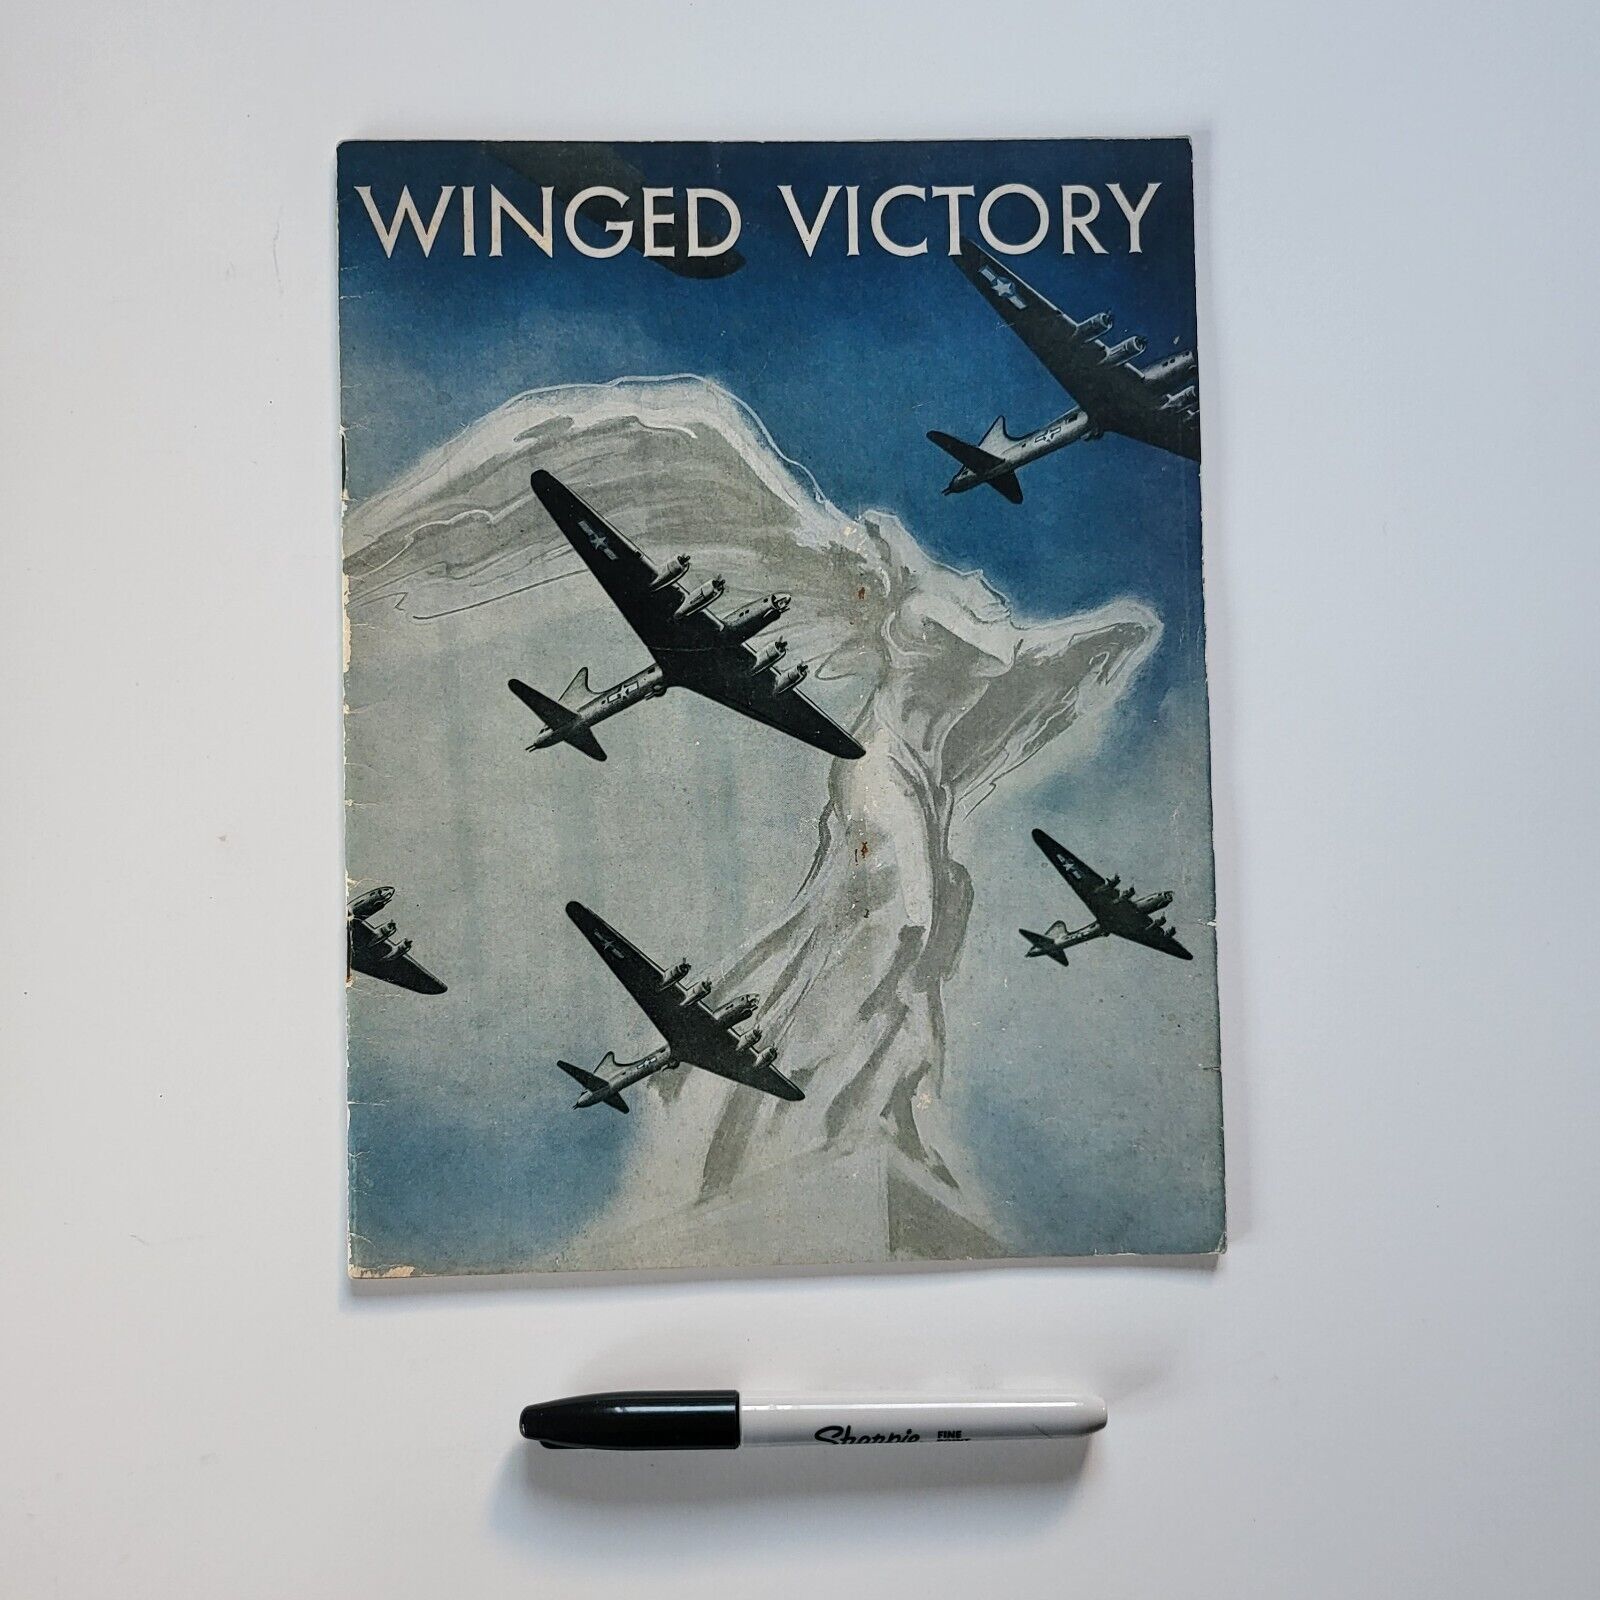 The US Army Air Forces Winged Victory a Play by Moss Hart